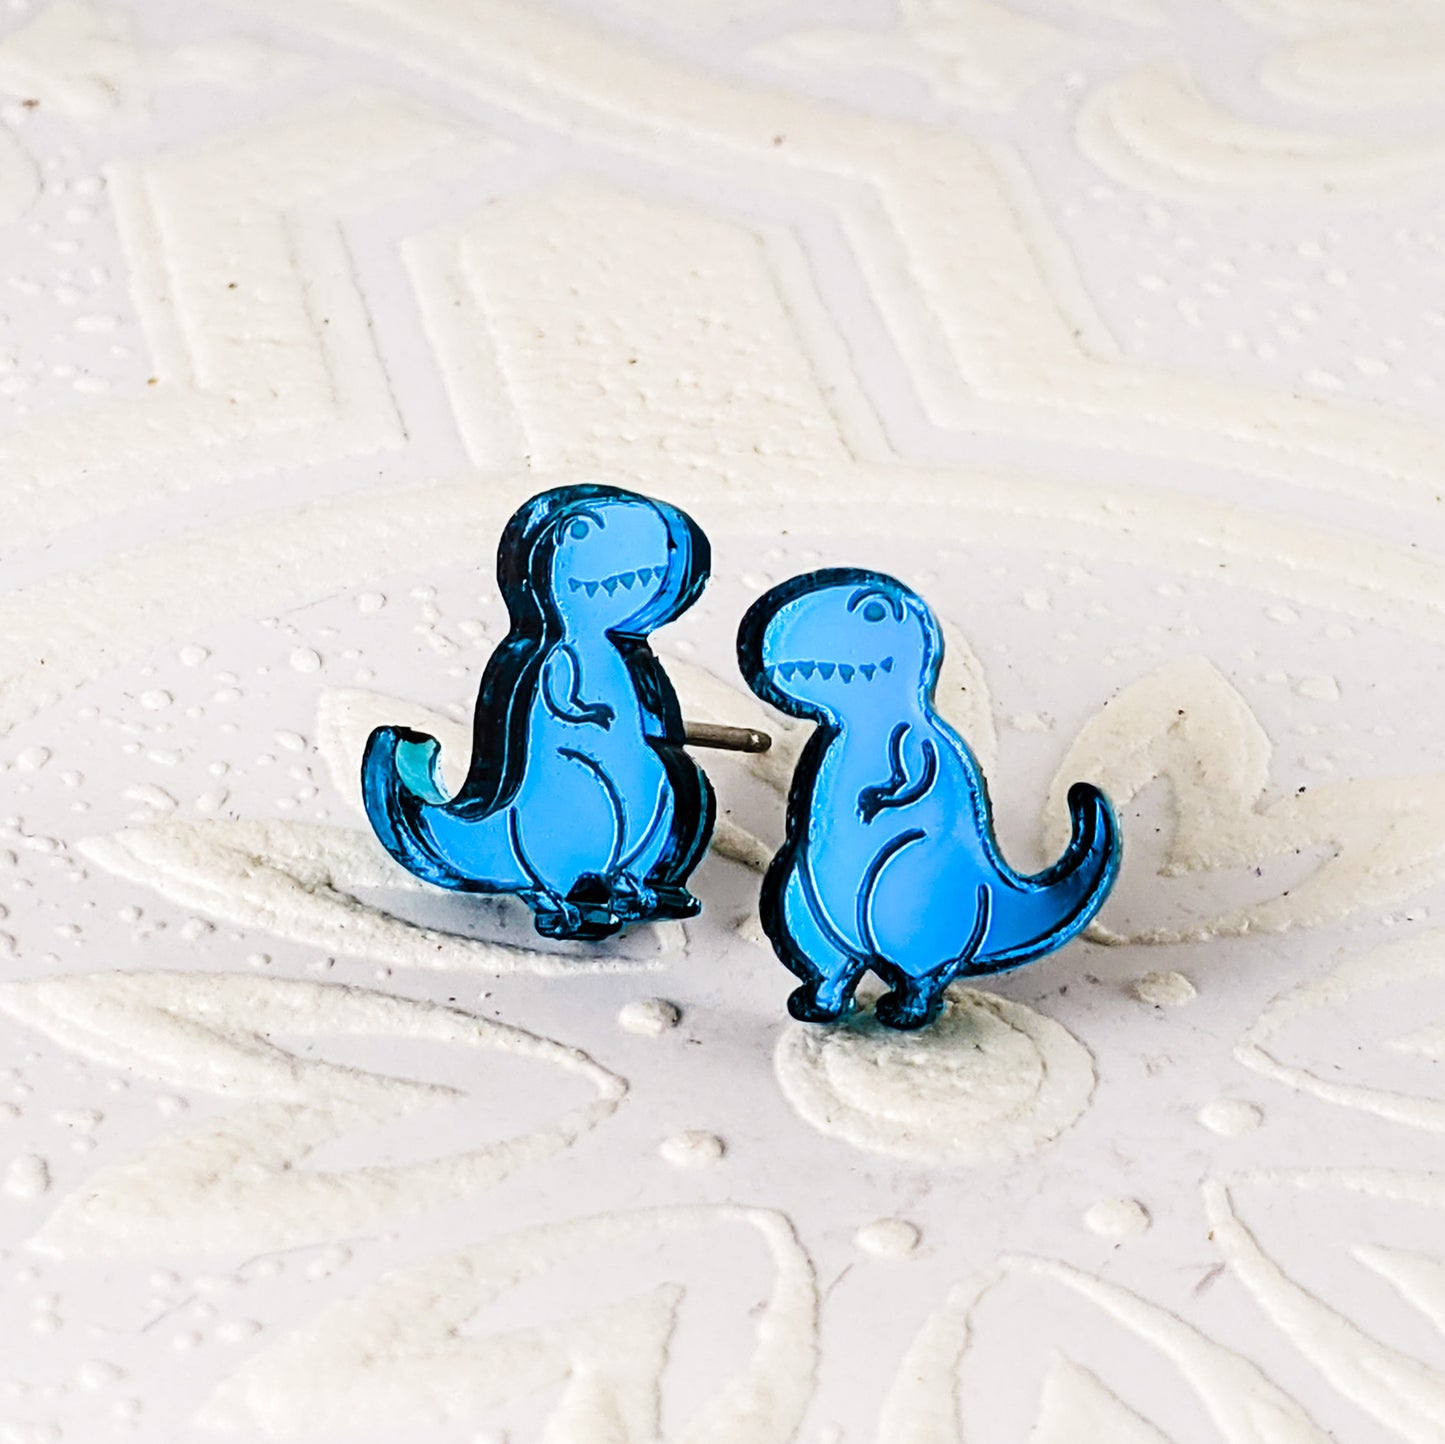 Cartoon Tyrannosaurus Rex stud earrings in teal mirrored acrylic.  The dinosaurs are mirrored, and face towards each other.  By Isette. 